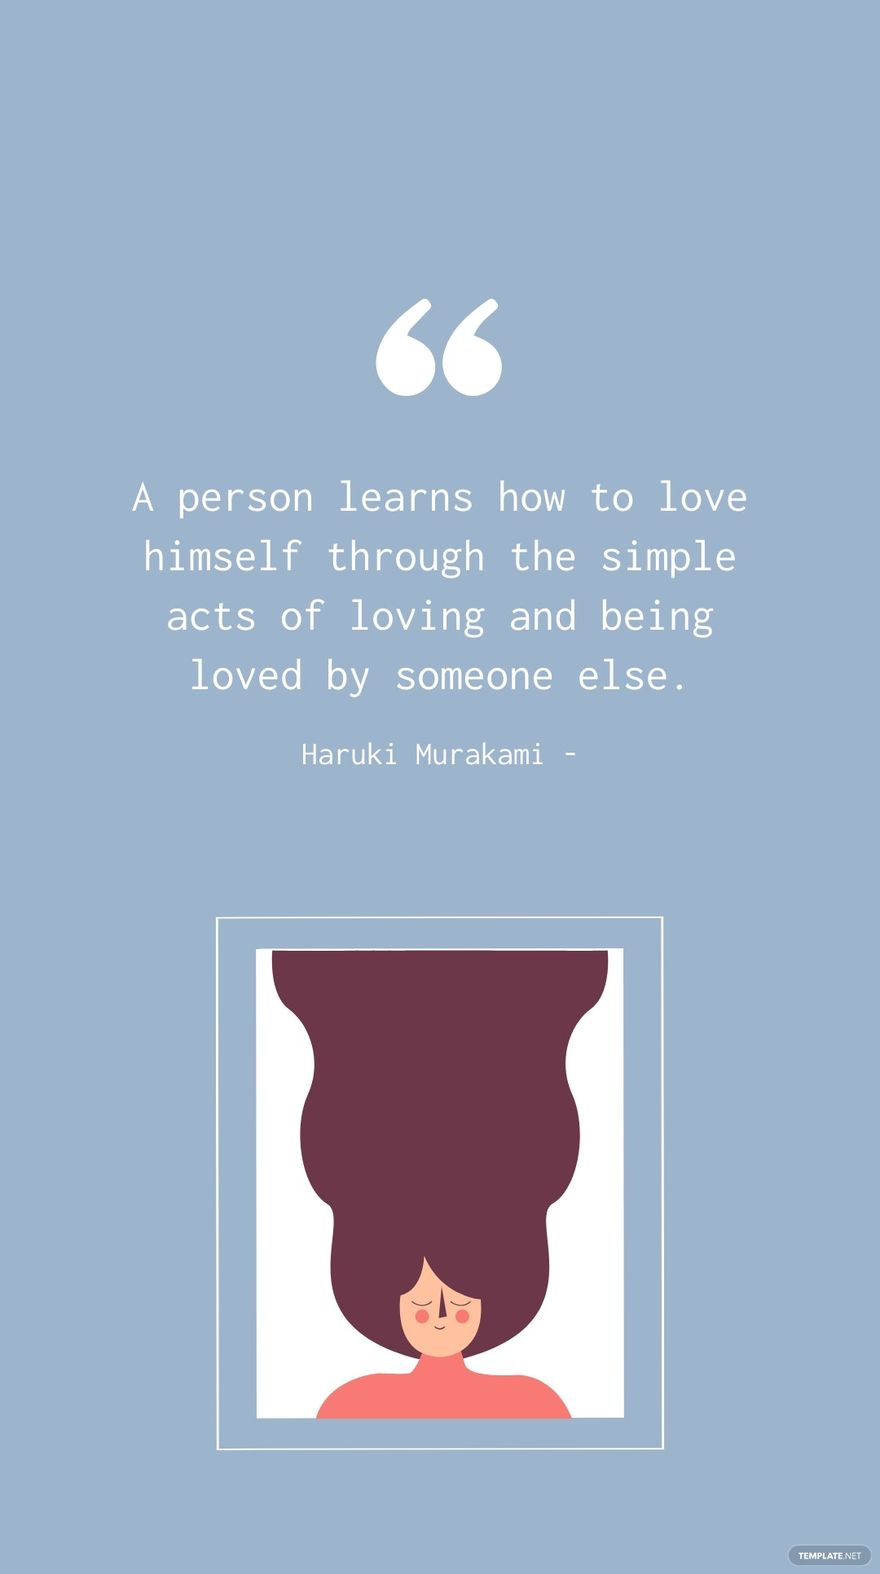 Haruki Murakami - A person learns how to love himself through the simple acts of loving and being loved by someone else.